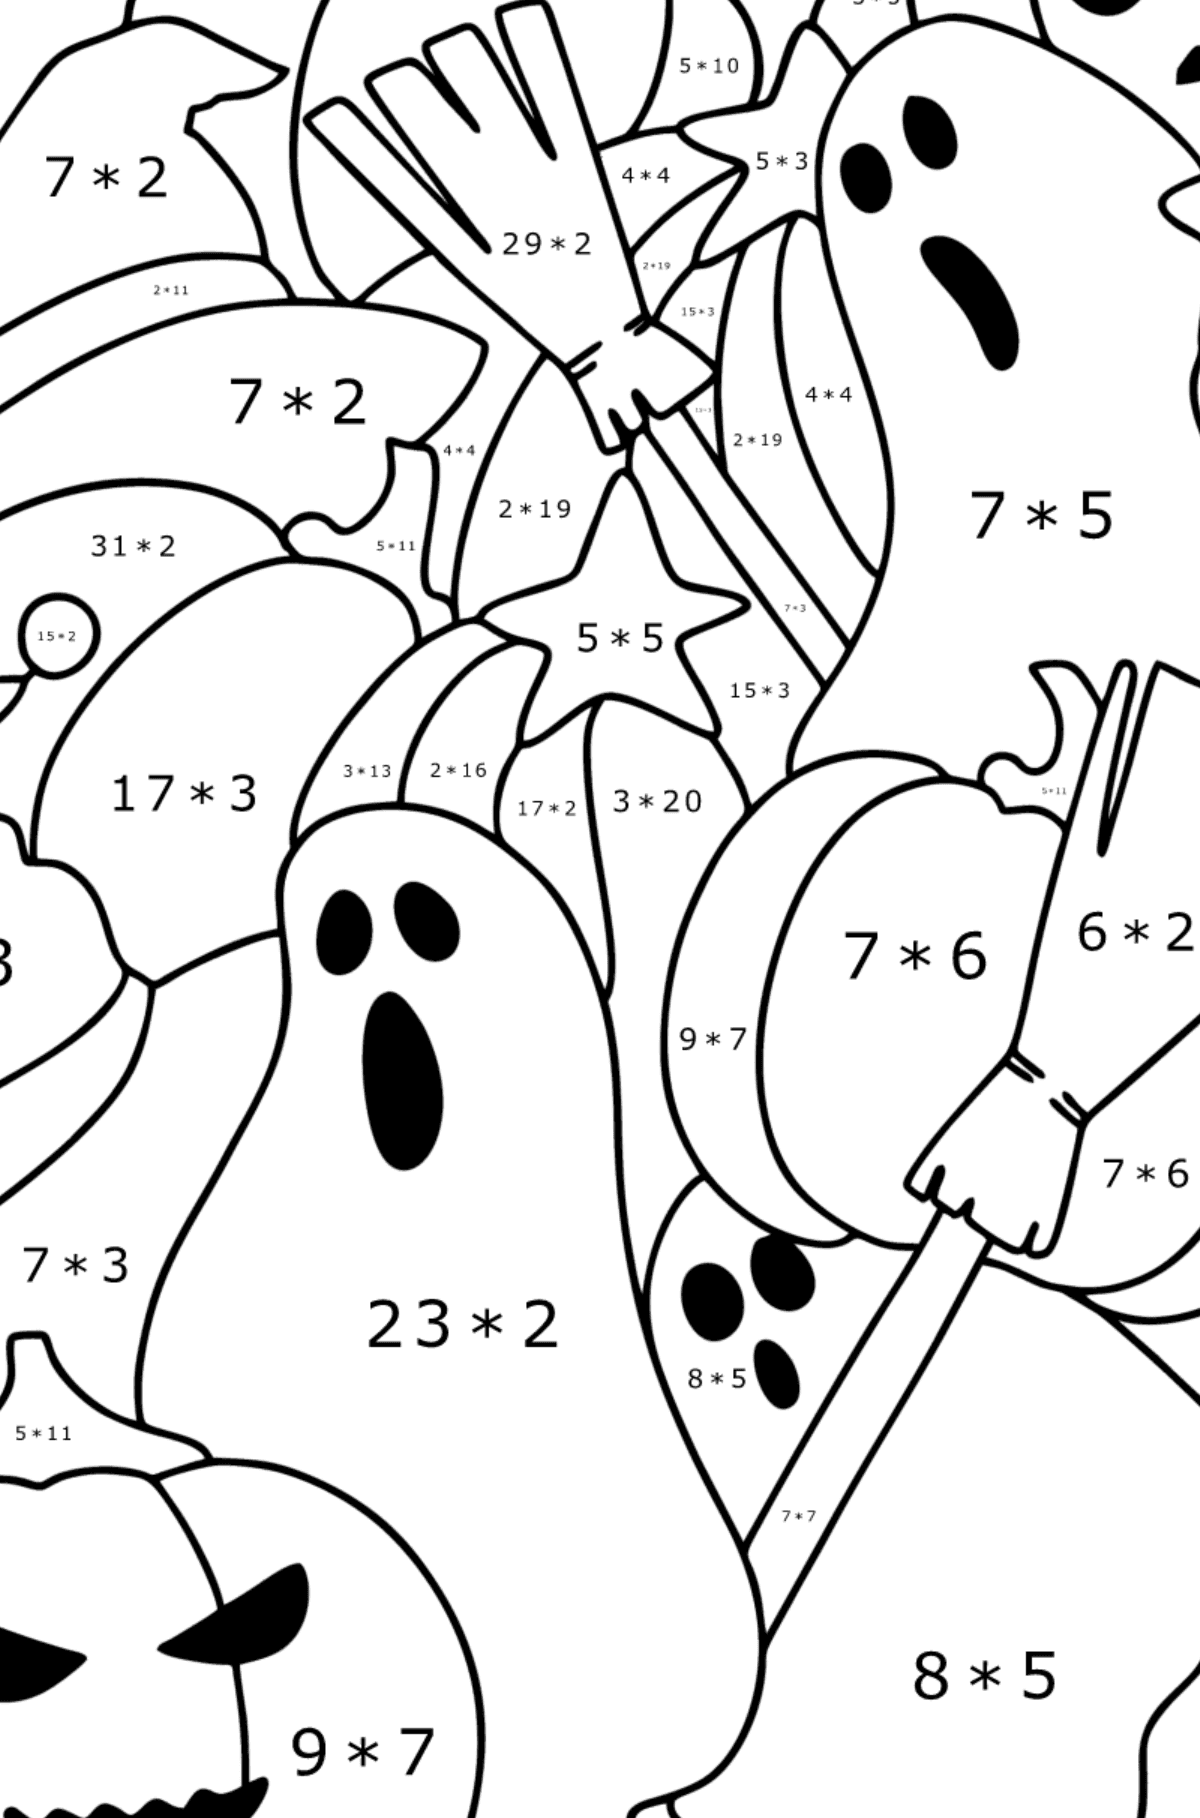 Doodle Сoloring page for Kids - Halloween - Math Coloring - Multiplication for Kids